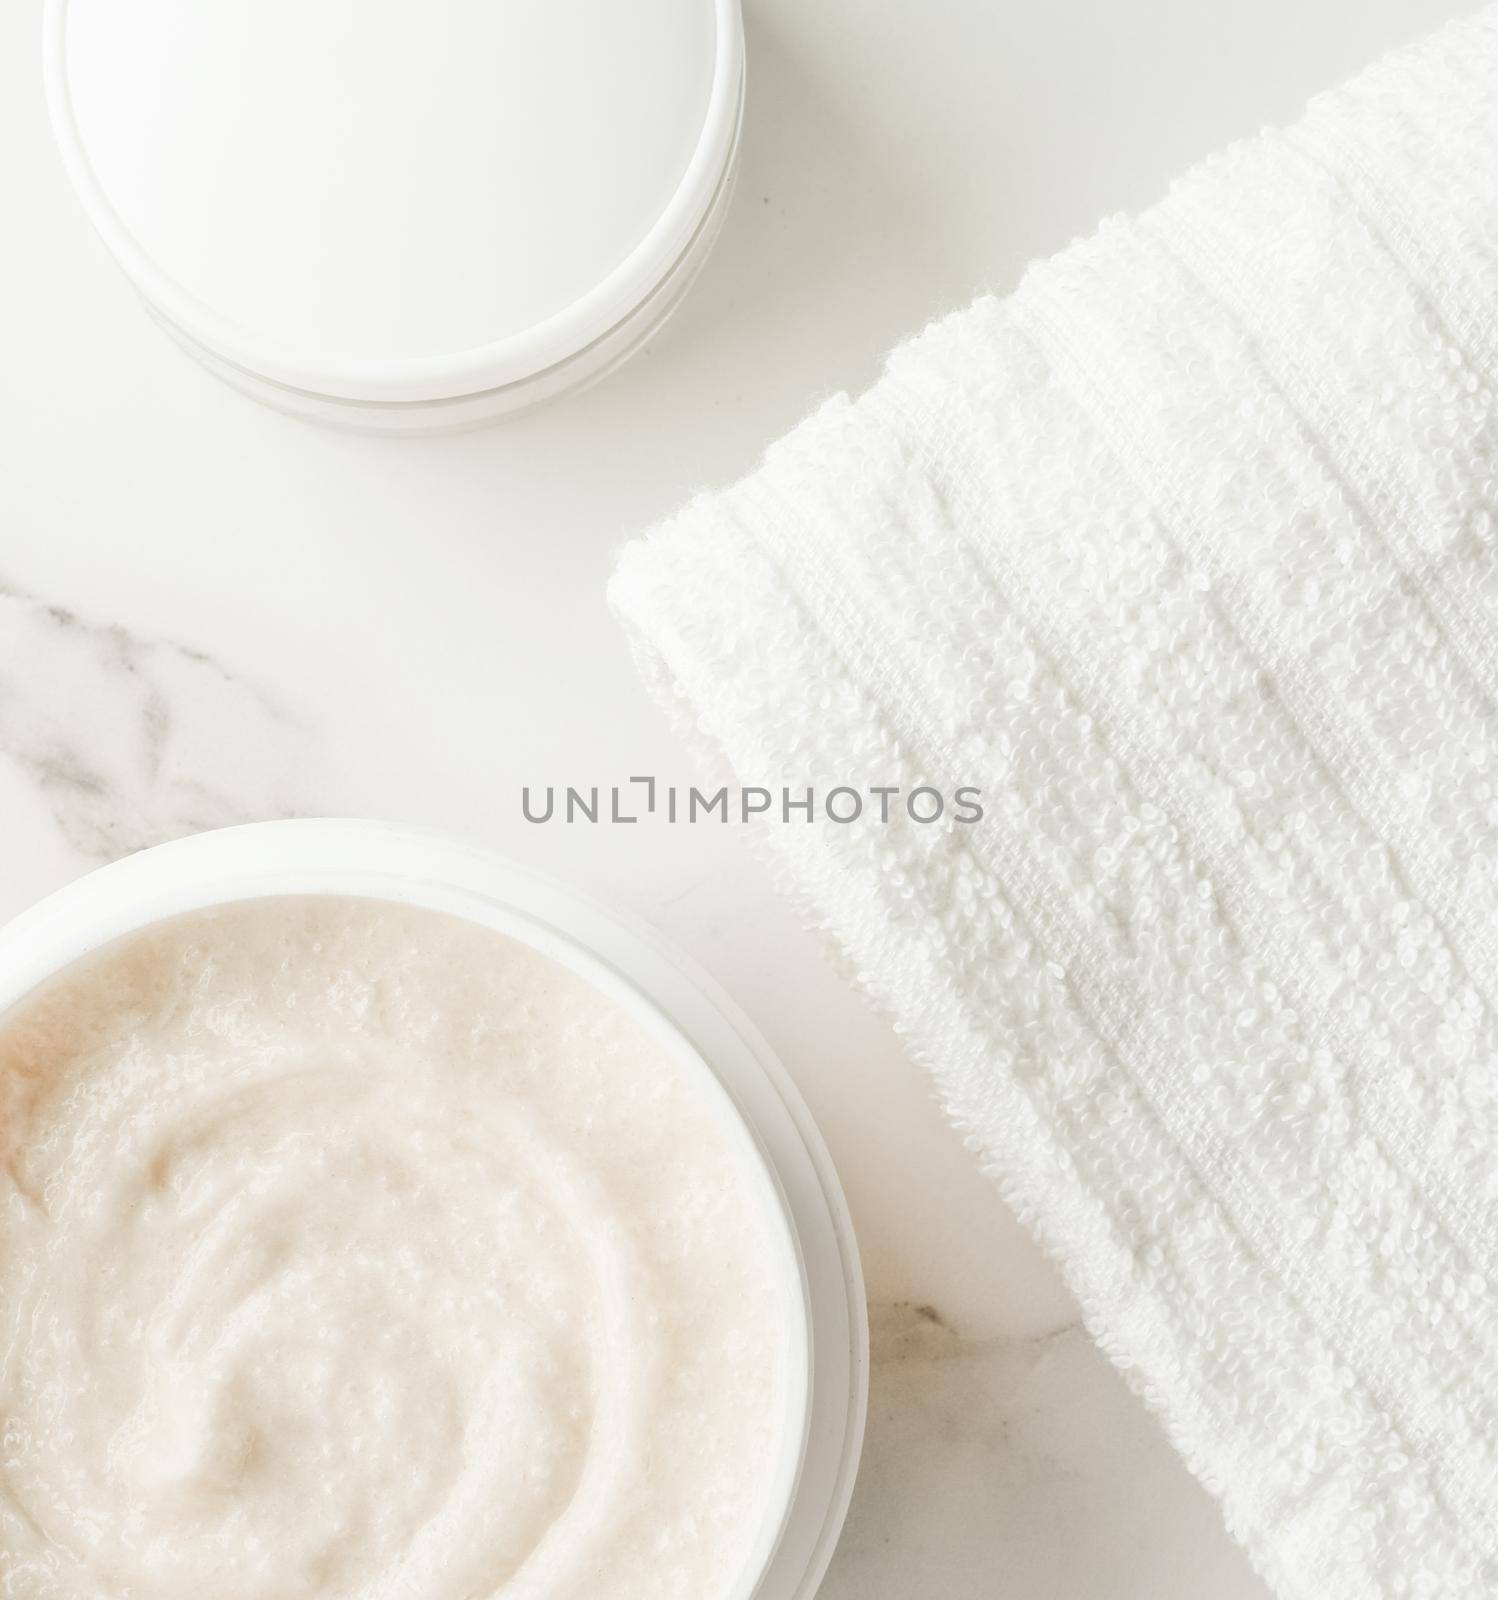 Scrub and exfoliating cream products on a marble, flatlay - skincare and body care, luxury spa and clean cosmetic concept. Health and beauty of your skin